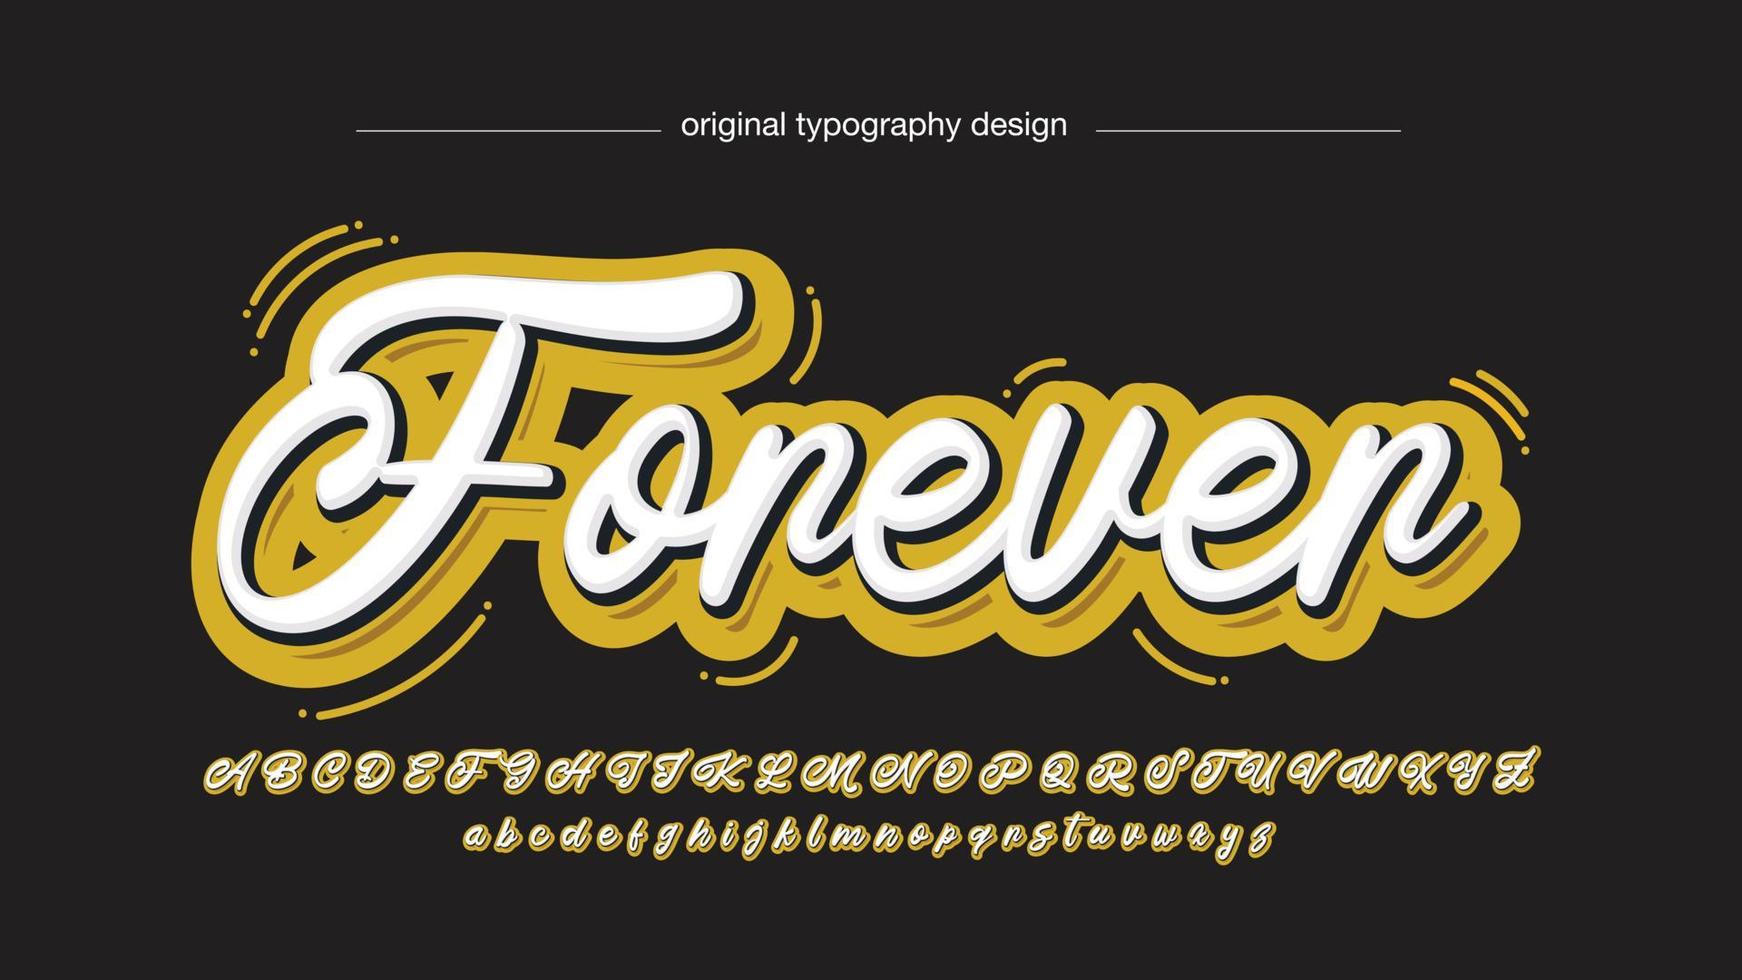 yellow and white 3d calligraphy artistic font vector